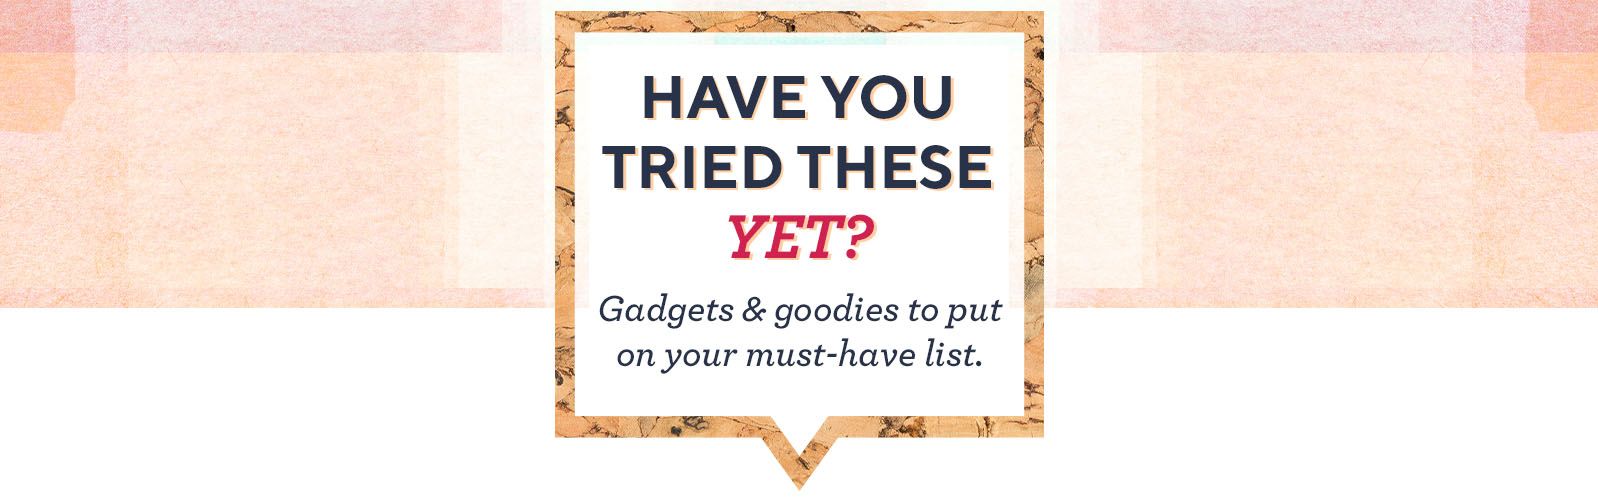 Have You Tried These Yet?  Gadgets & goodies to put on your must-have list. 